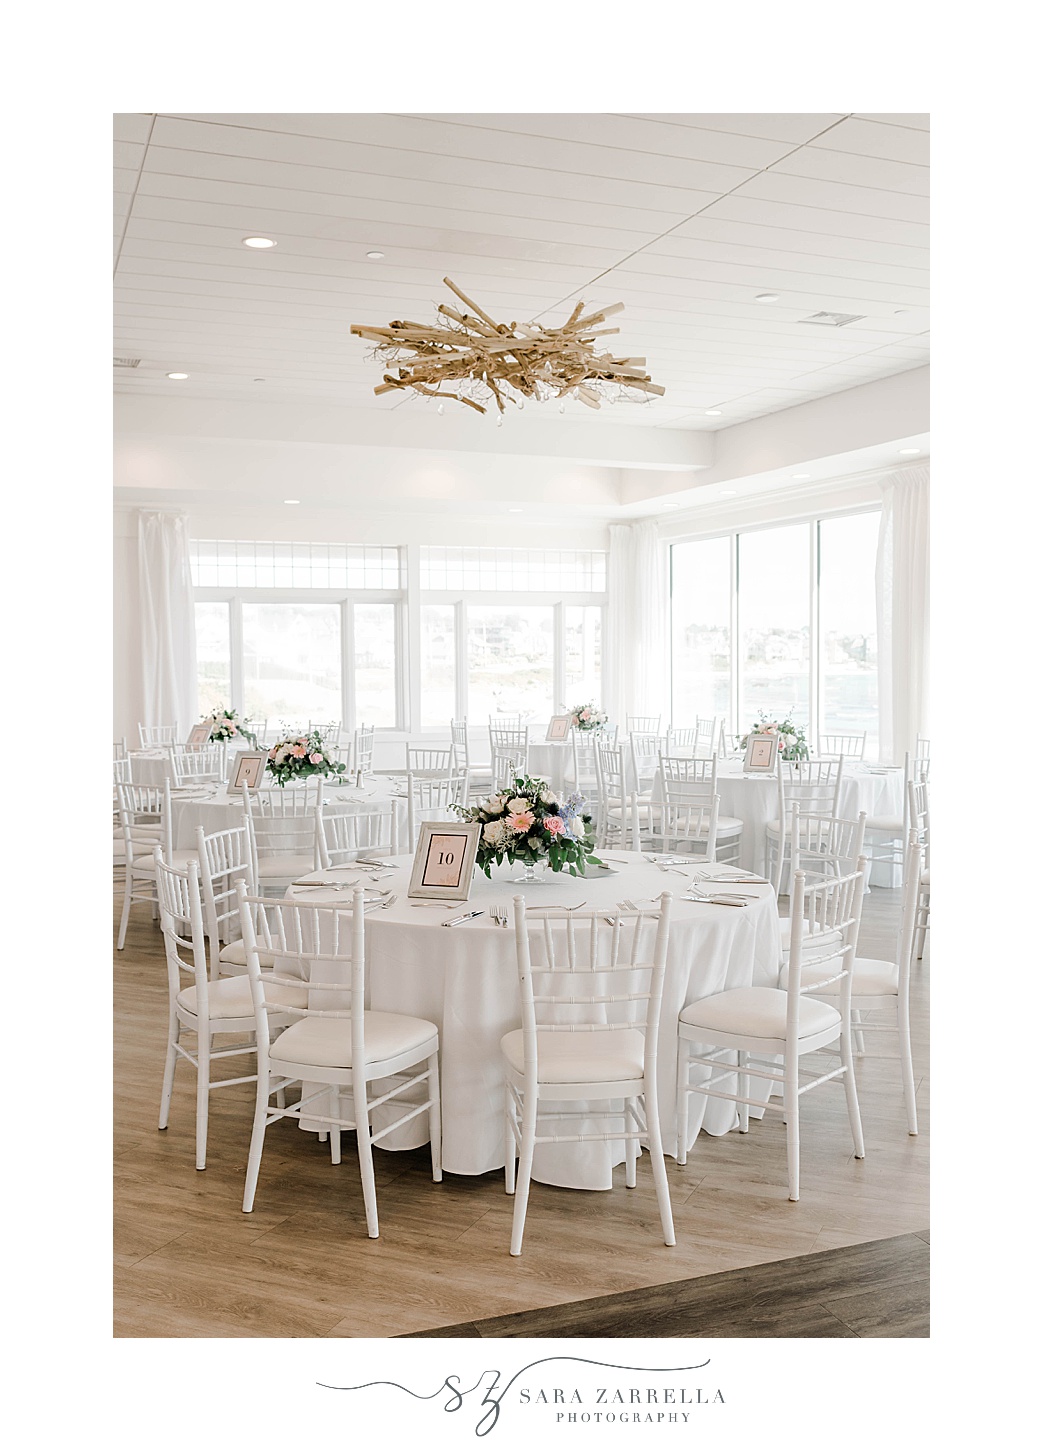 ivory and gold details for Newport Beach House wedding reception